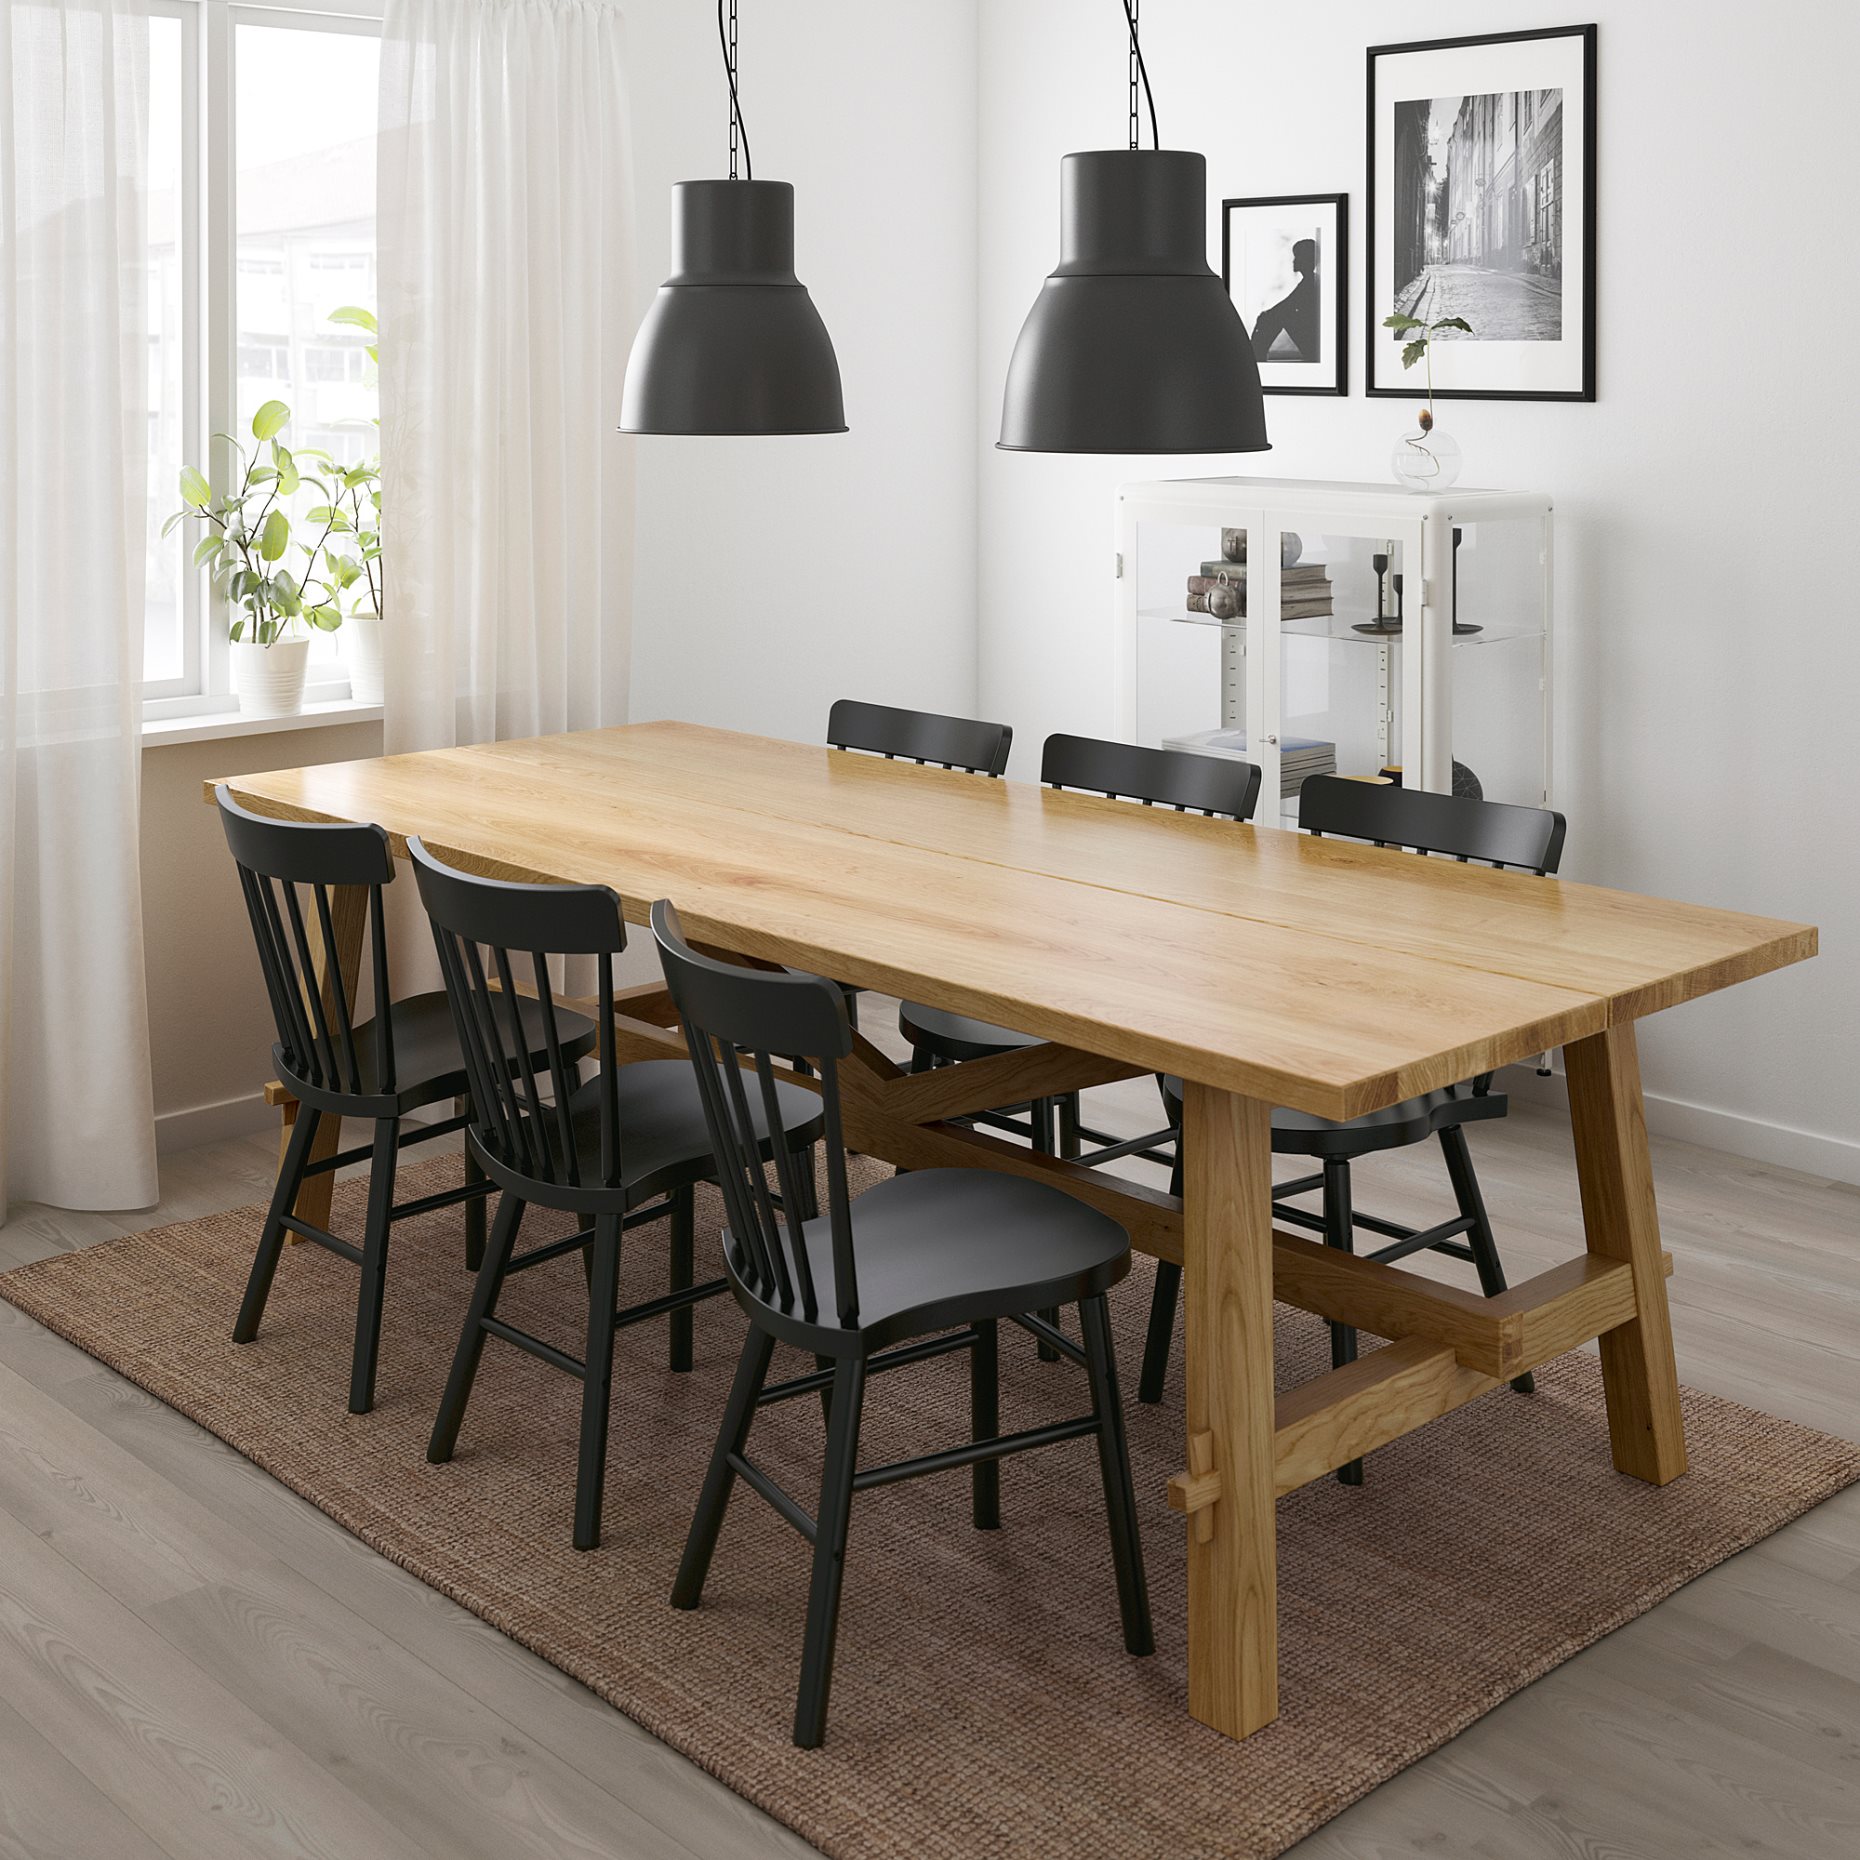 MOCKELBY/NORRARYD, table and 6 chairs, 591.614.92